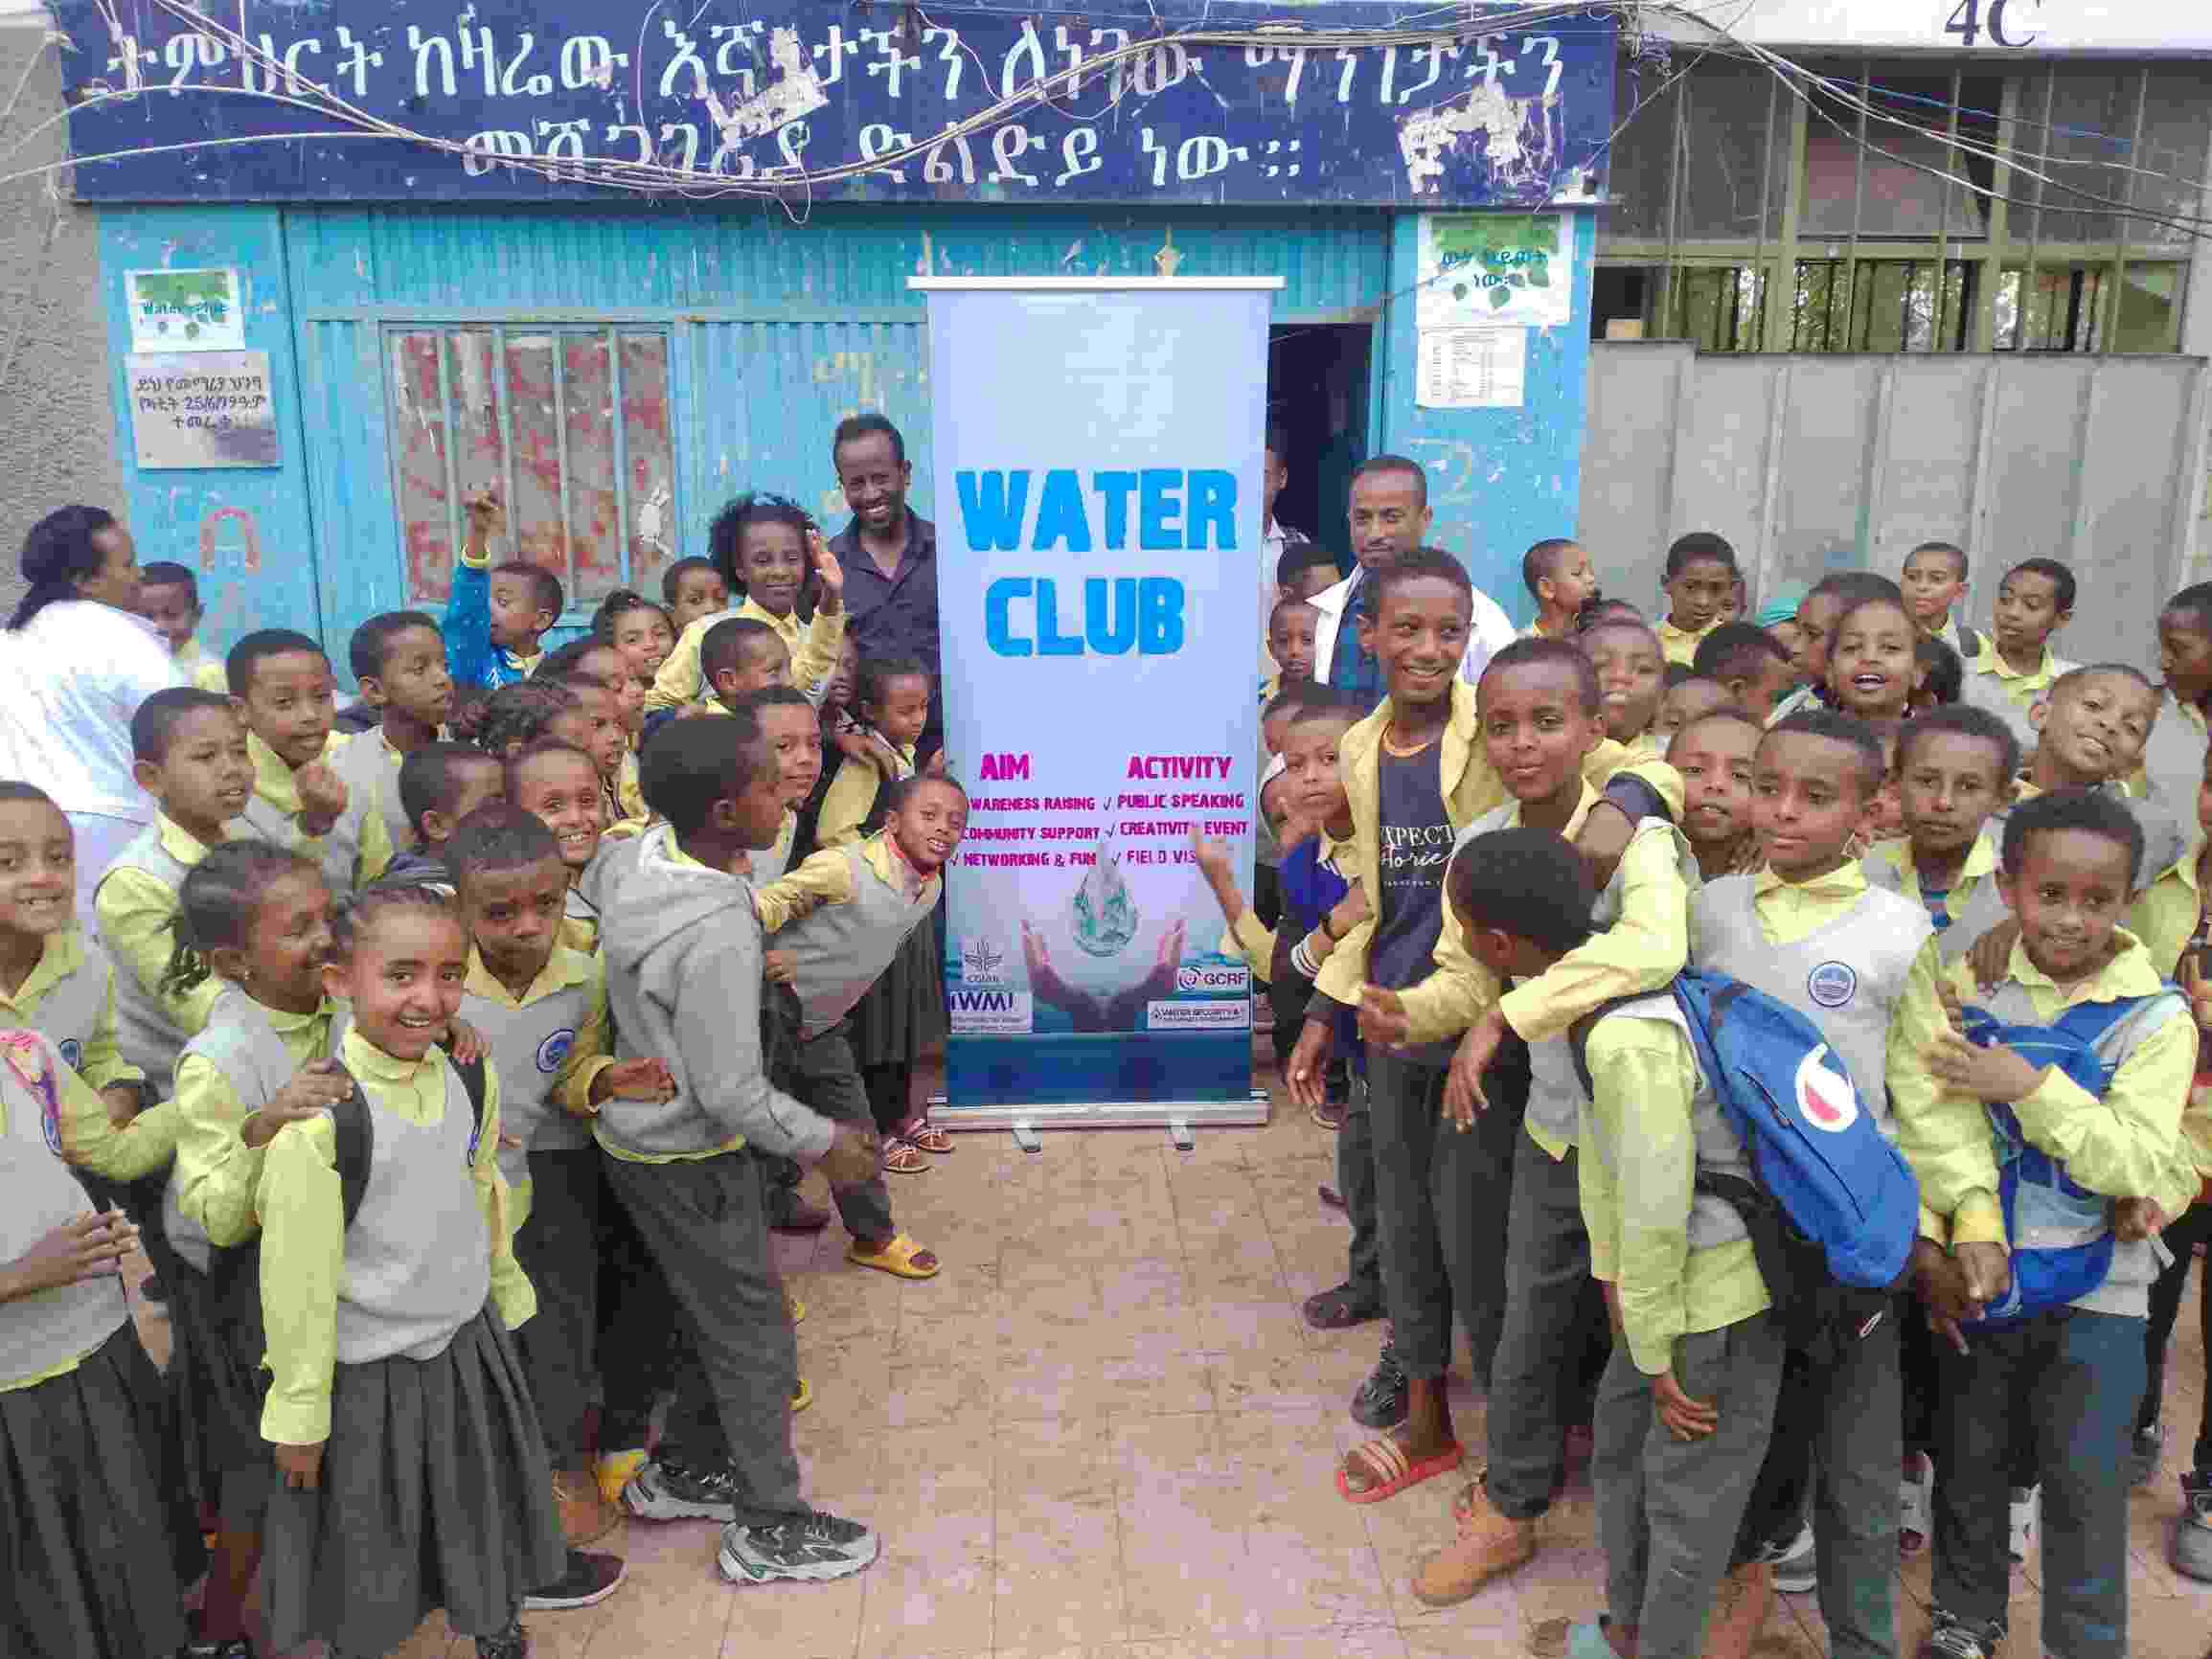 A large crowd of school pupils stand together with Hub researchers around a banner that reads 'Water Club', smiling at the camera